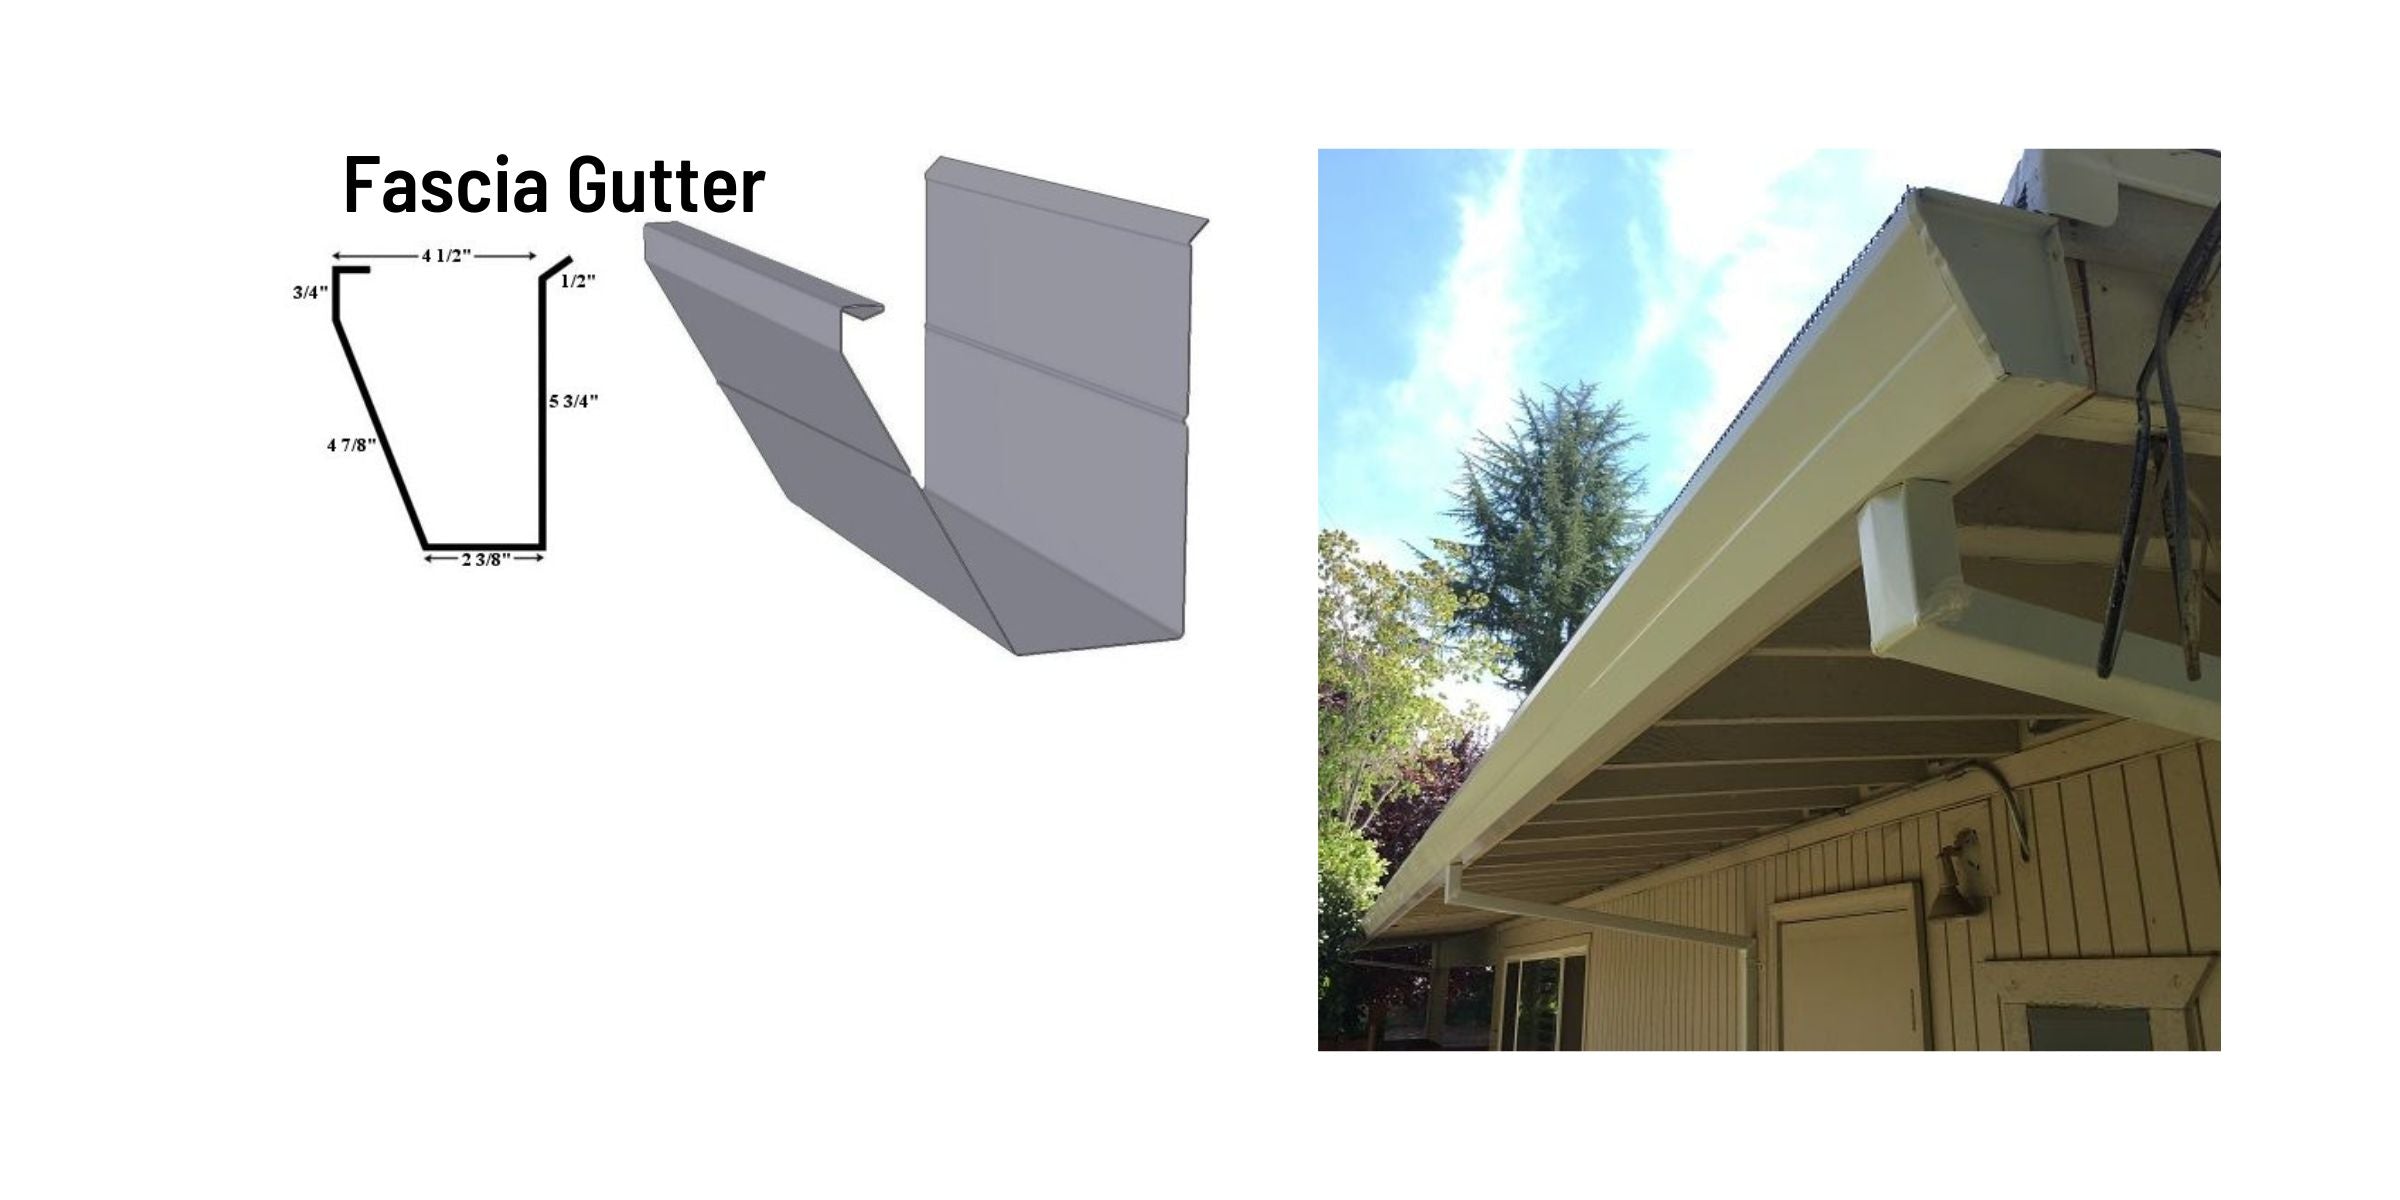 Fascia Style Gutter Measurements and House Example